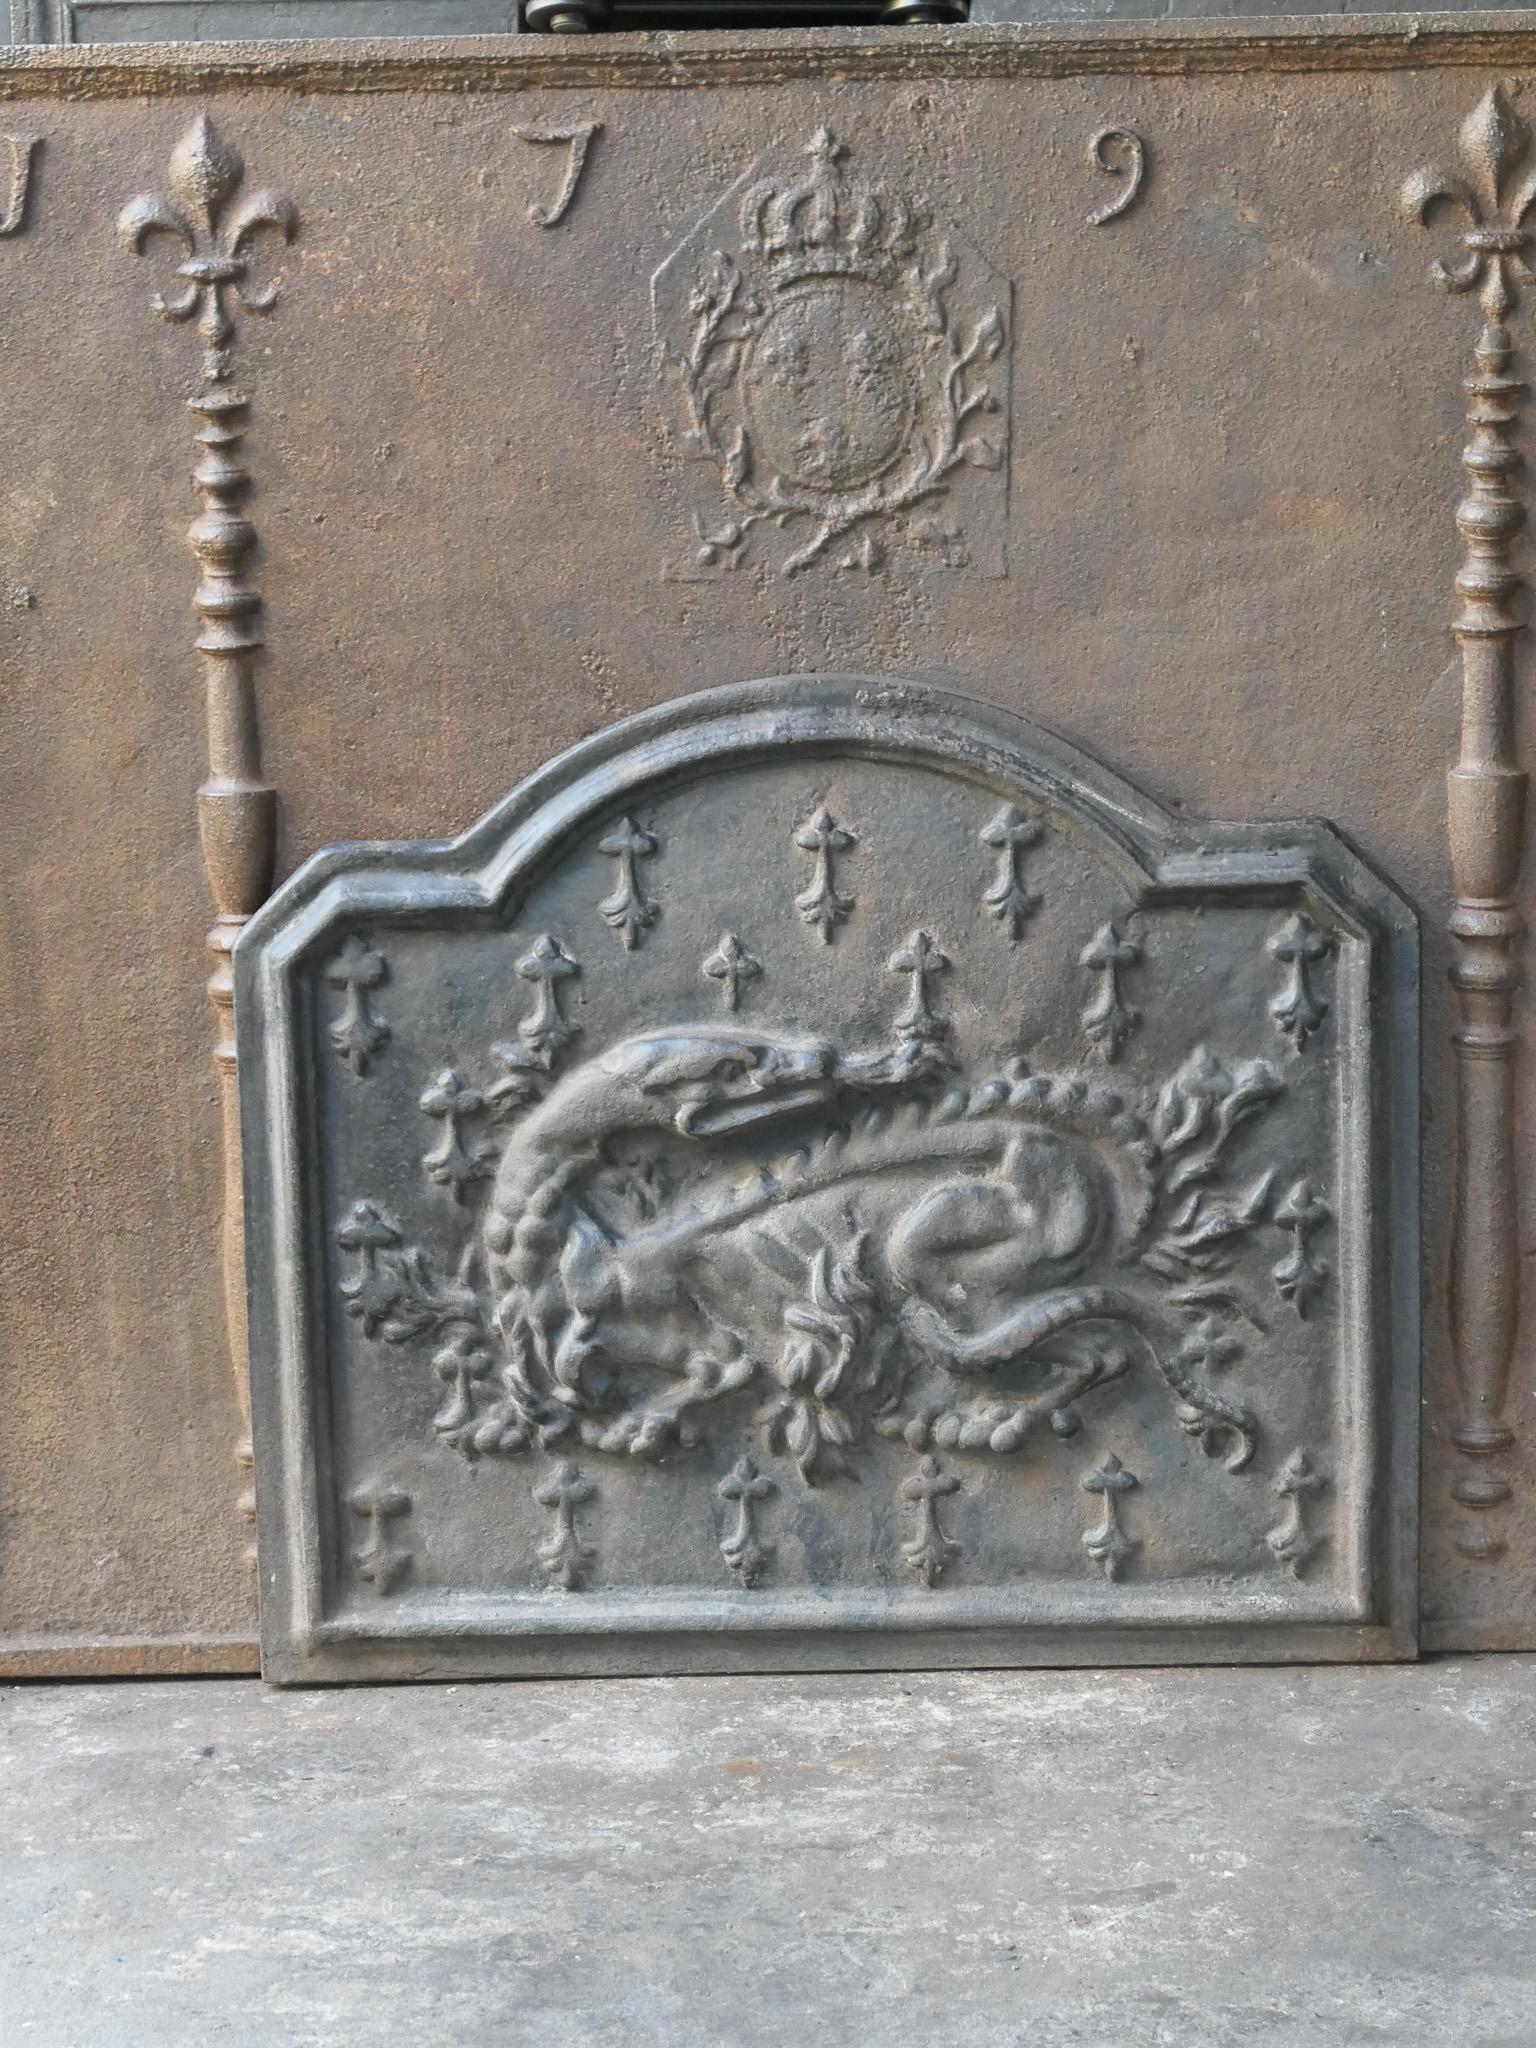 20th century French Napoleon III style fireback with the salamander. The salamander is symbol of King François I, who was King of France from 1515 till 1547.

The fireback is made of cast iron and has a natural brown patina. Upon request it can be